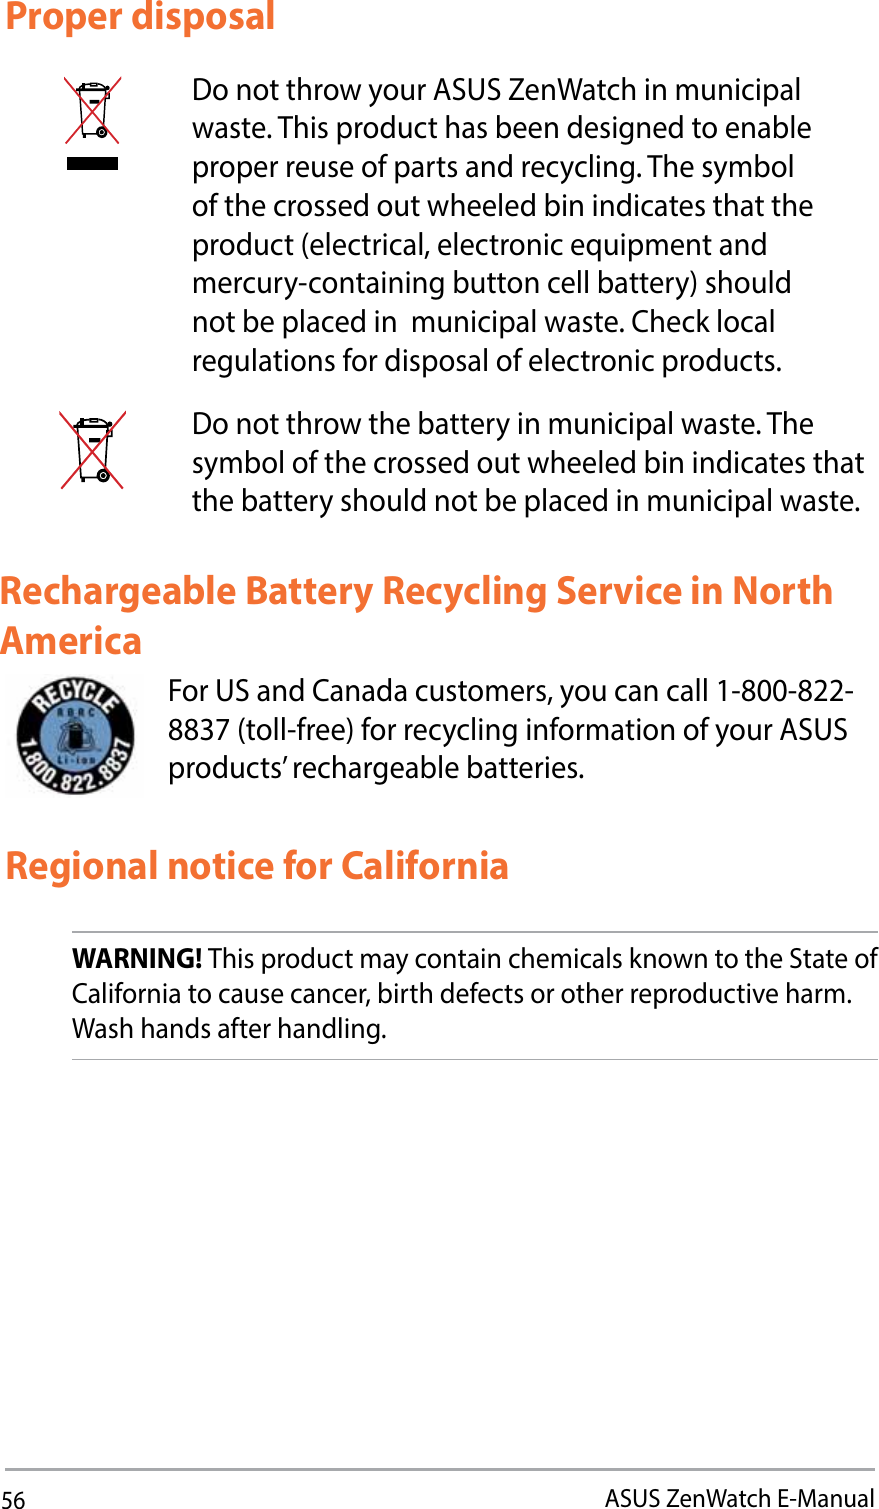 56ASUS ZenWatch E-ManualProper disposalDo not throw your ASUS ZenWatch in municipal waste. This product has been designed to enable proper reuse of parts and recycling. The symbol of the crossed out wheeled bin indicates that the QSPEVDUFMFDUSJDBMFMFDUSPOJDFRVJQNFOUBOEmercury-containing button cell battery) should not be placed in  municipal waste. Check local regulations for disposal of electronic products.Do not throw the battery in municipal waste. The symbol of the crossed out wheeled bin indicates that the battery should not be placed in municipal waste.For US and Canada customers, you can call 1-800-822-8837 (toll-free) for recycling information of your ASUS products’ rechargeable batteries.Rechargeable Battery Recycling Service in North AmericaRegional notice for CaliforniaWARNING! This product may contain chemicals known to the State of California to cause cancer, birth defects or other reproductive harm. Wash hands after handling.